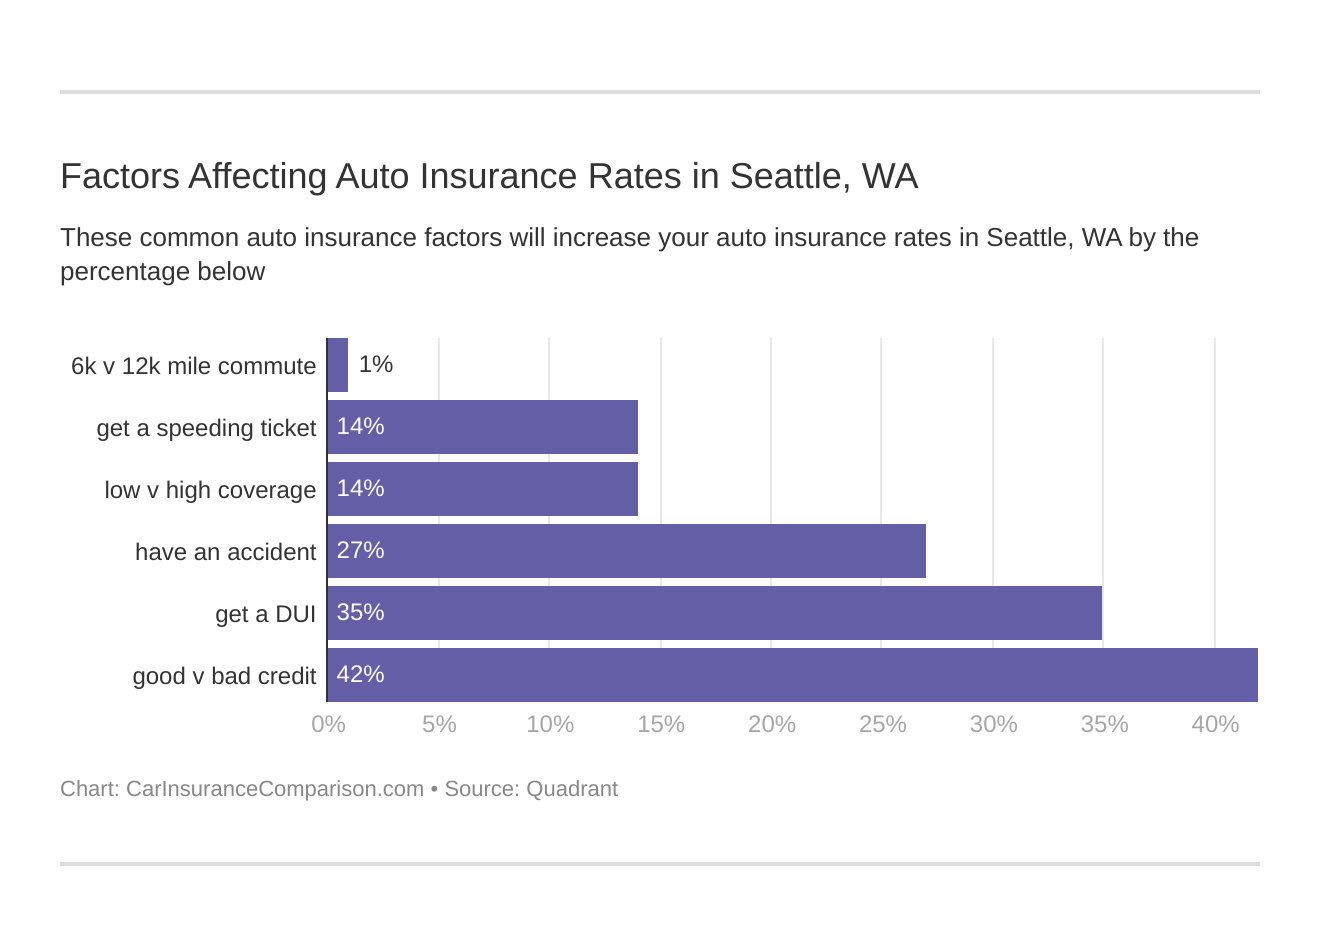 Factors Affecting Auto Insurance Rates in Seattle, WA